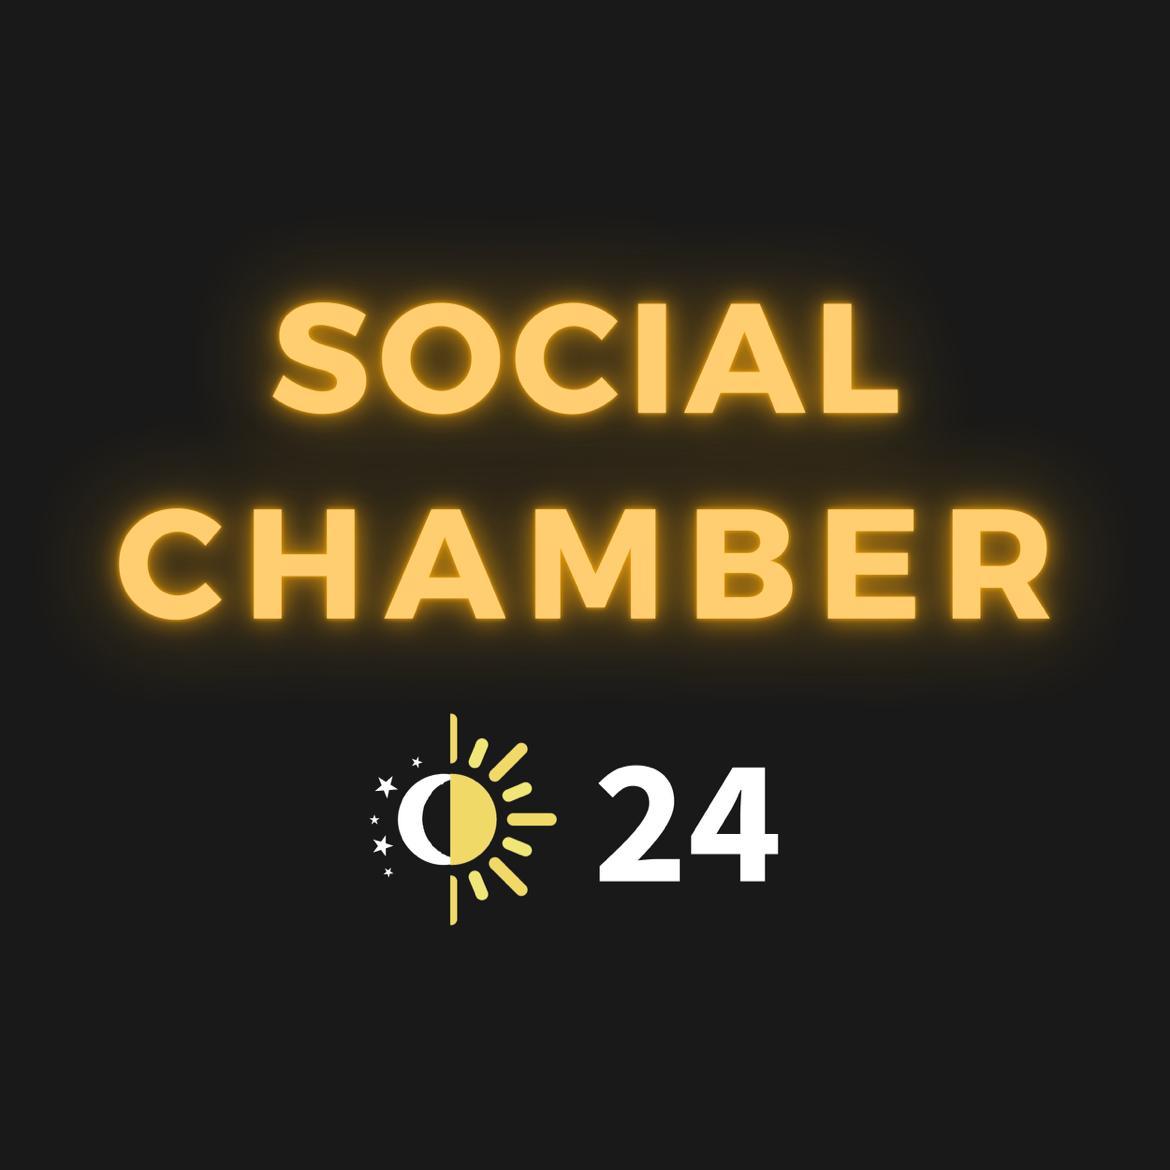 Social Chamber's images